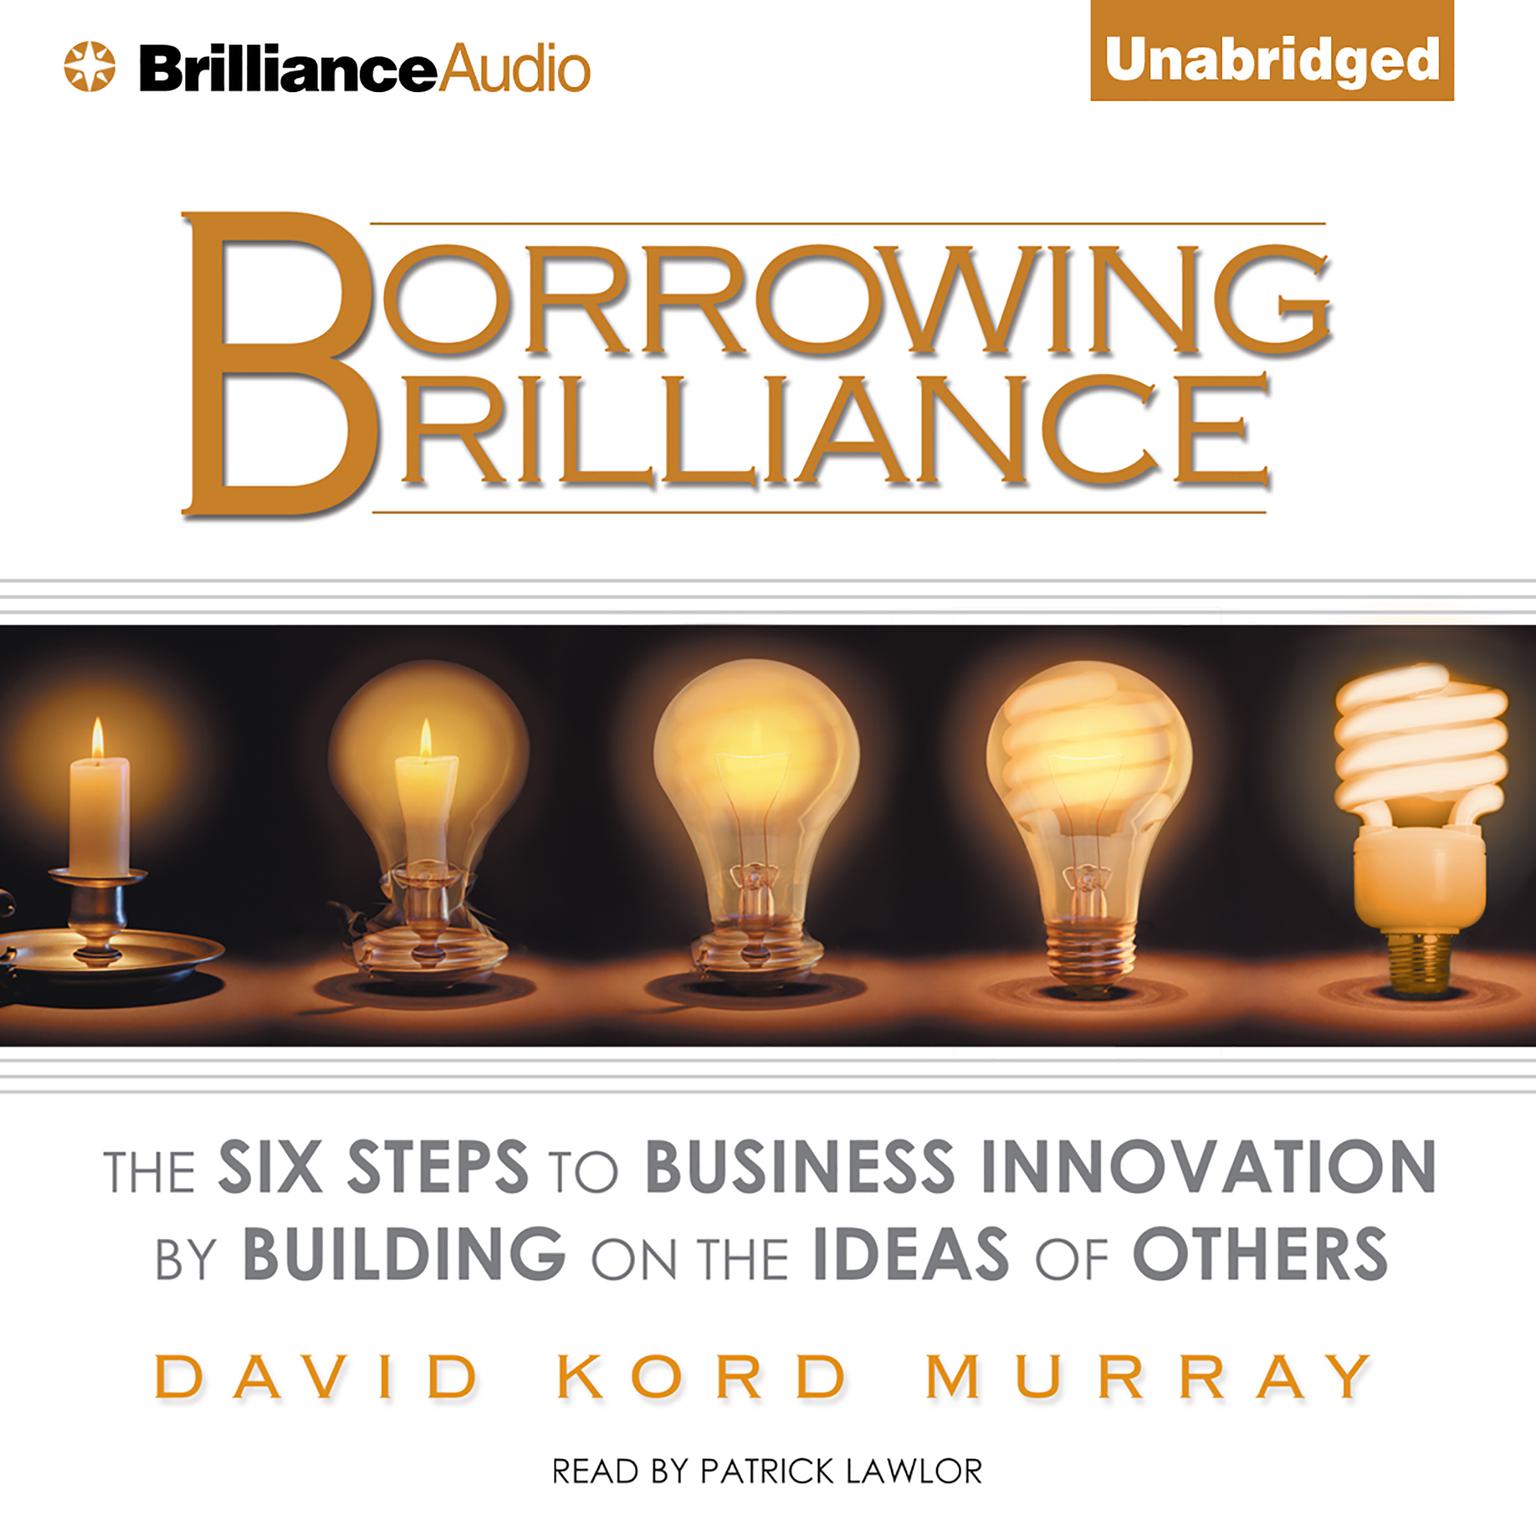 Borrowing Brilliance: The Six Steps to Business Innovation by Building on the Ideas of Others Audiobook, by David Kord Murray